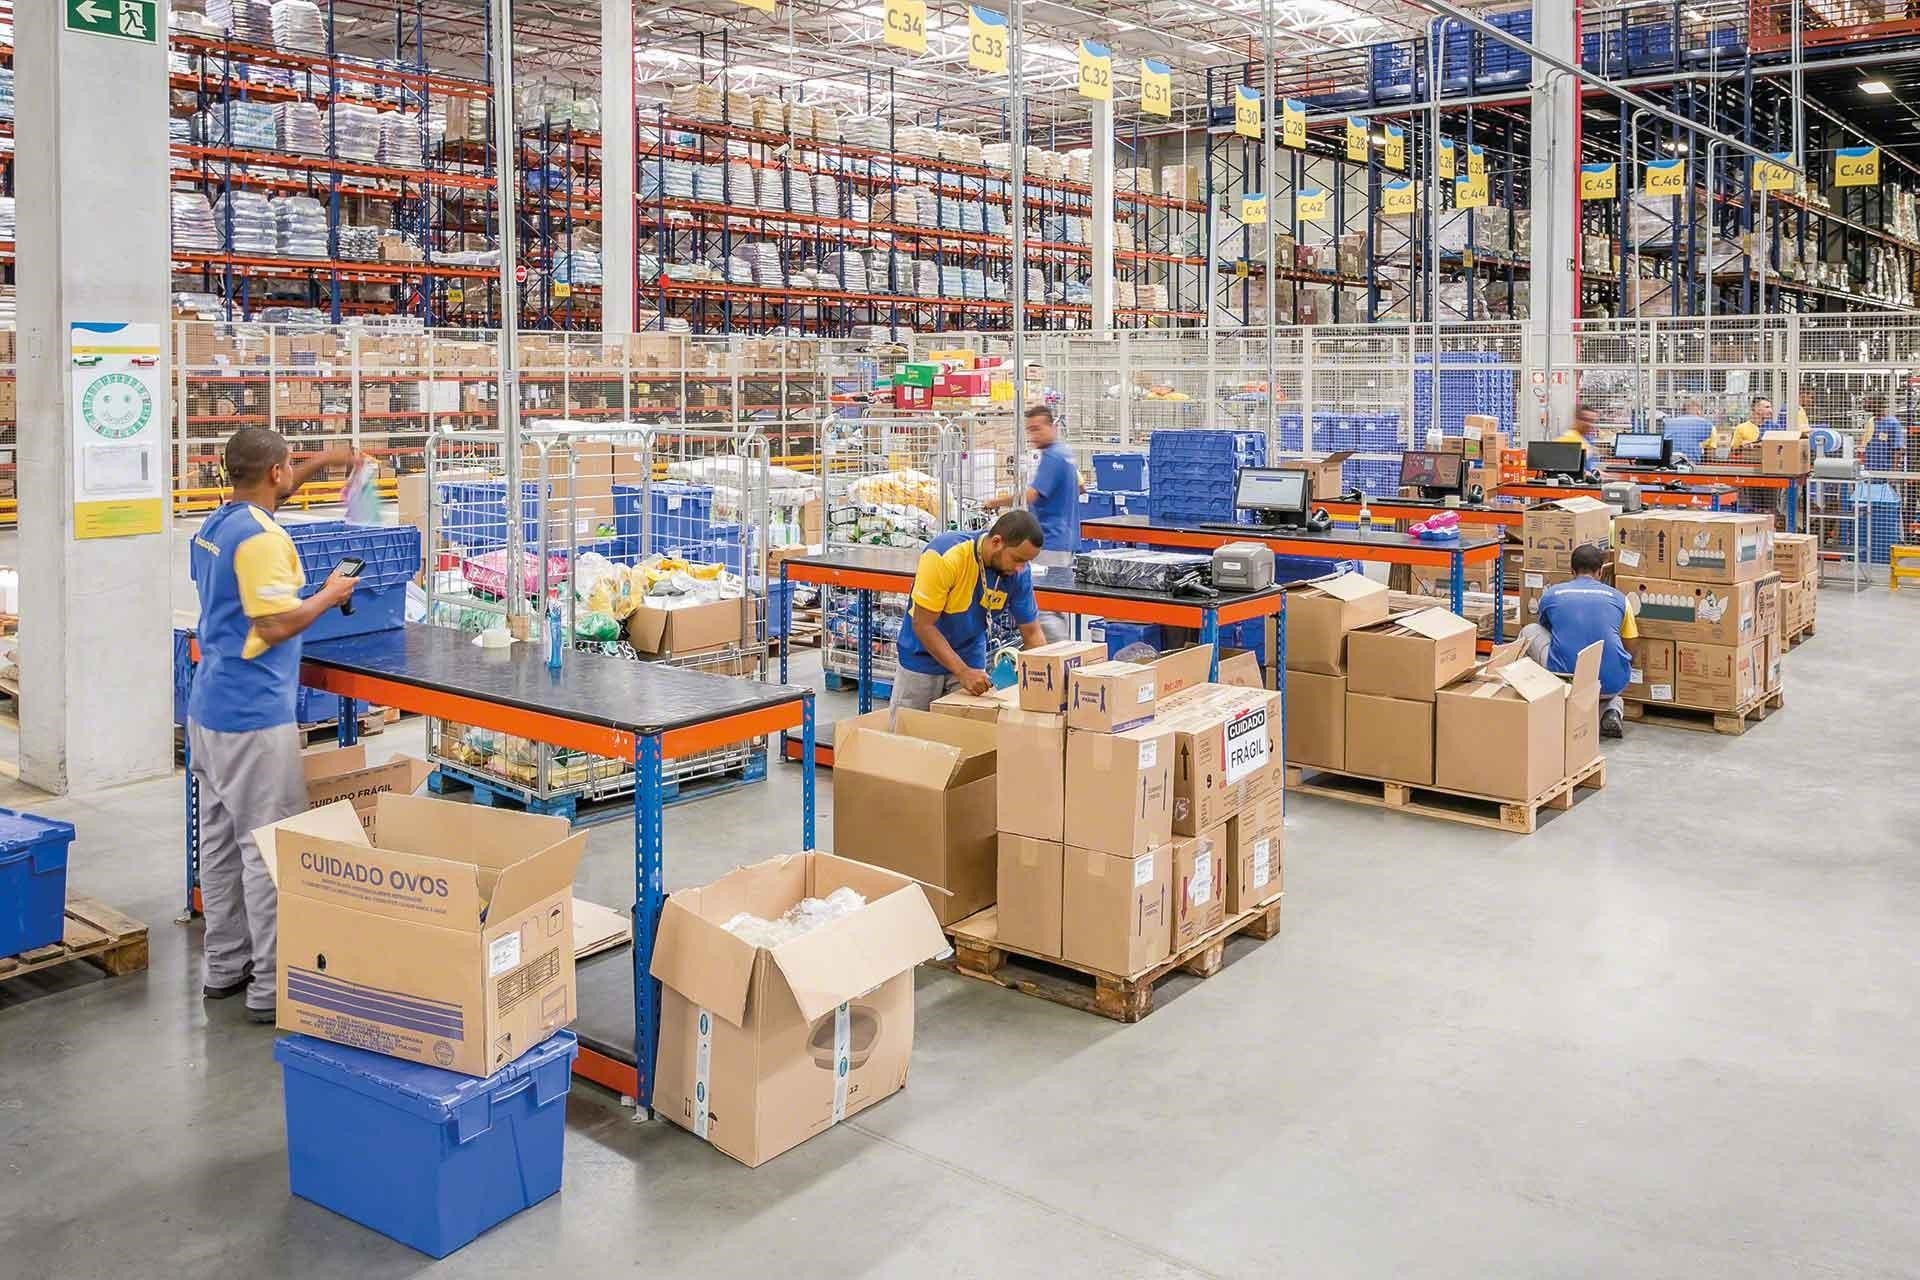 Successfully managing logistics operations in peak season is a challenge